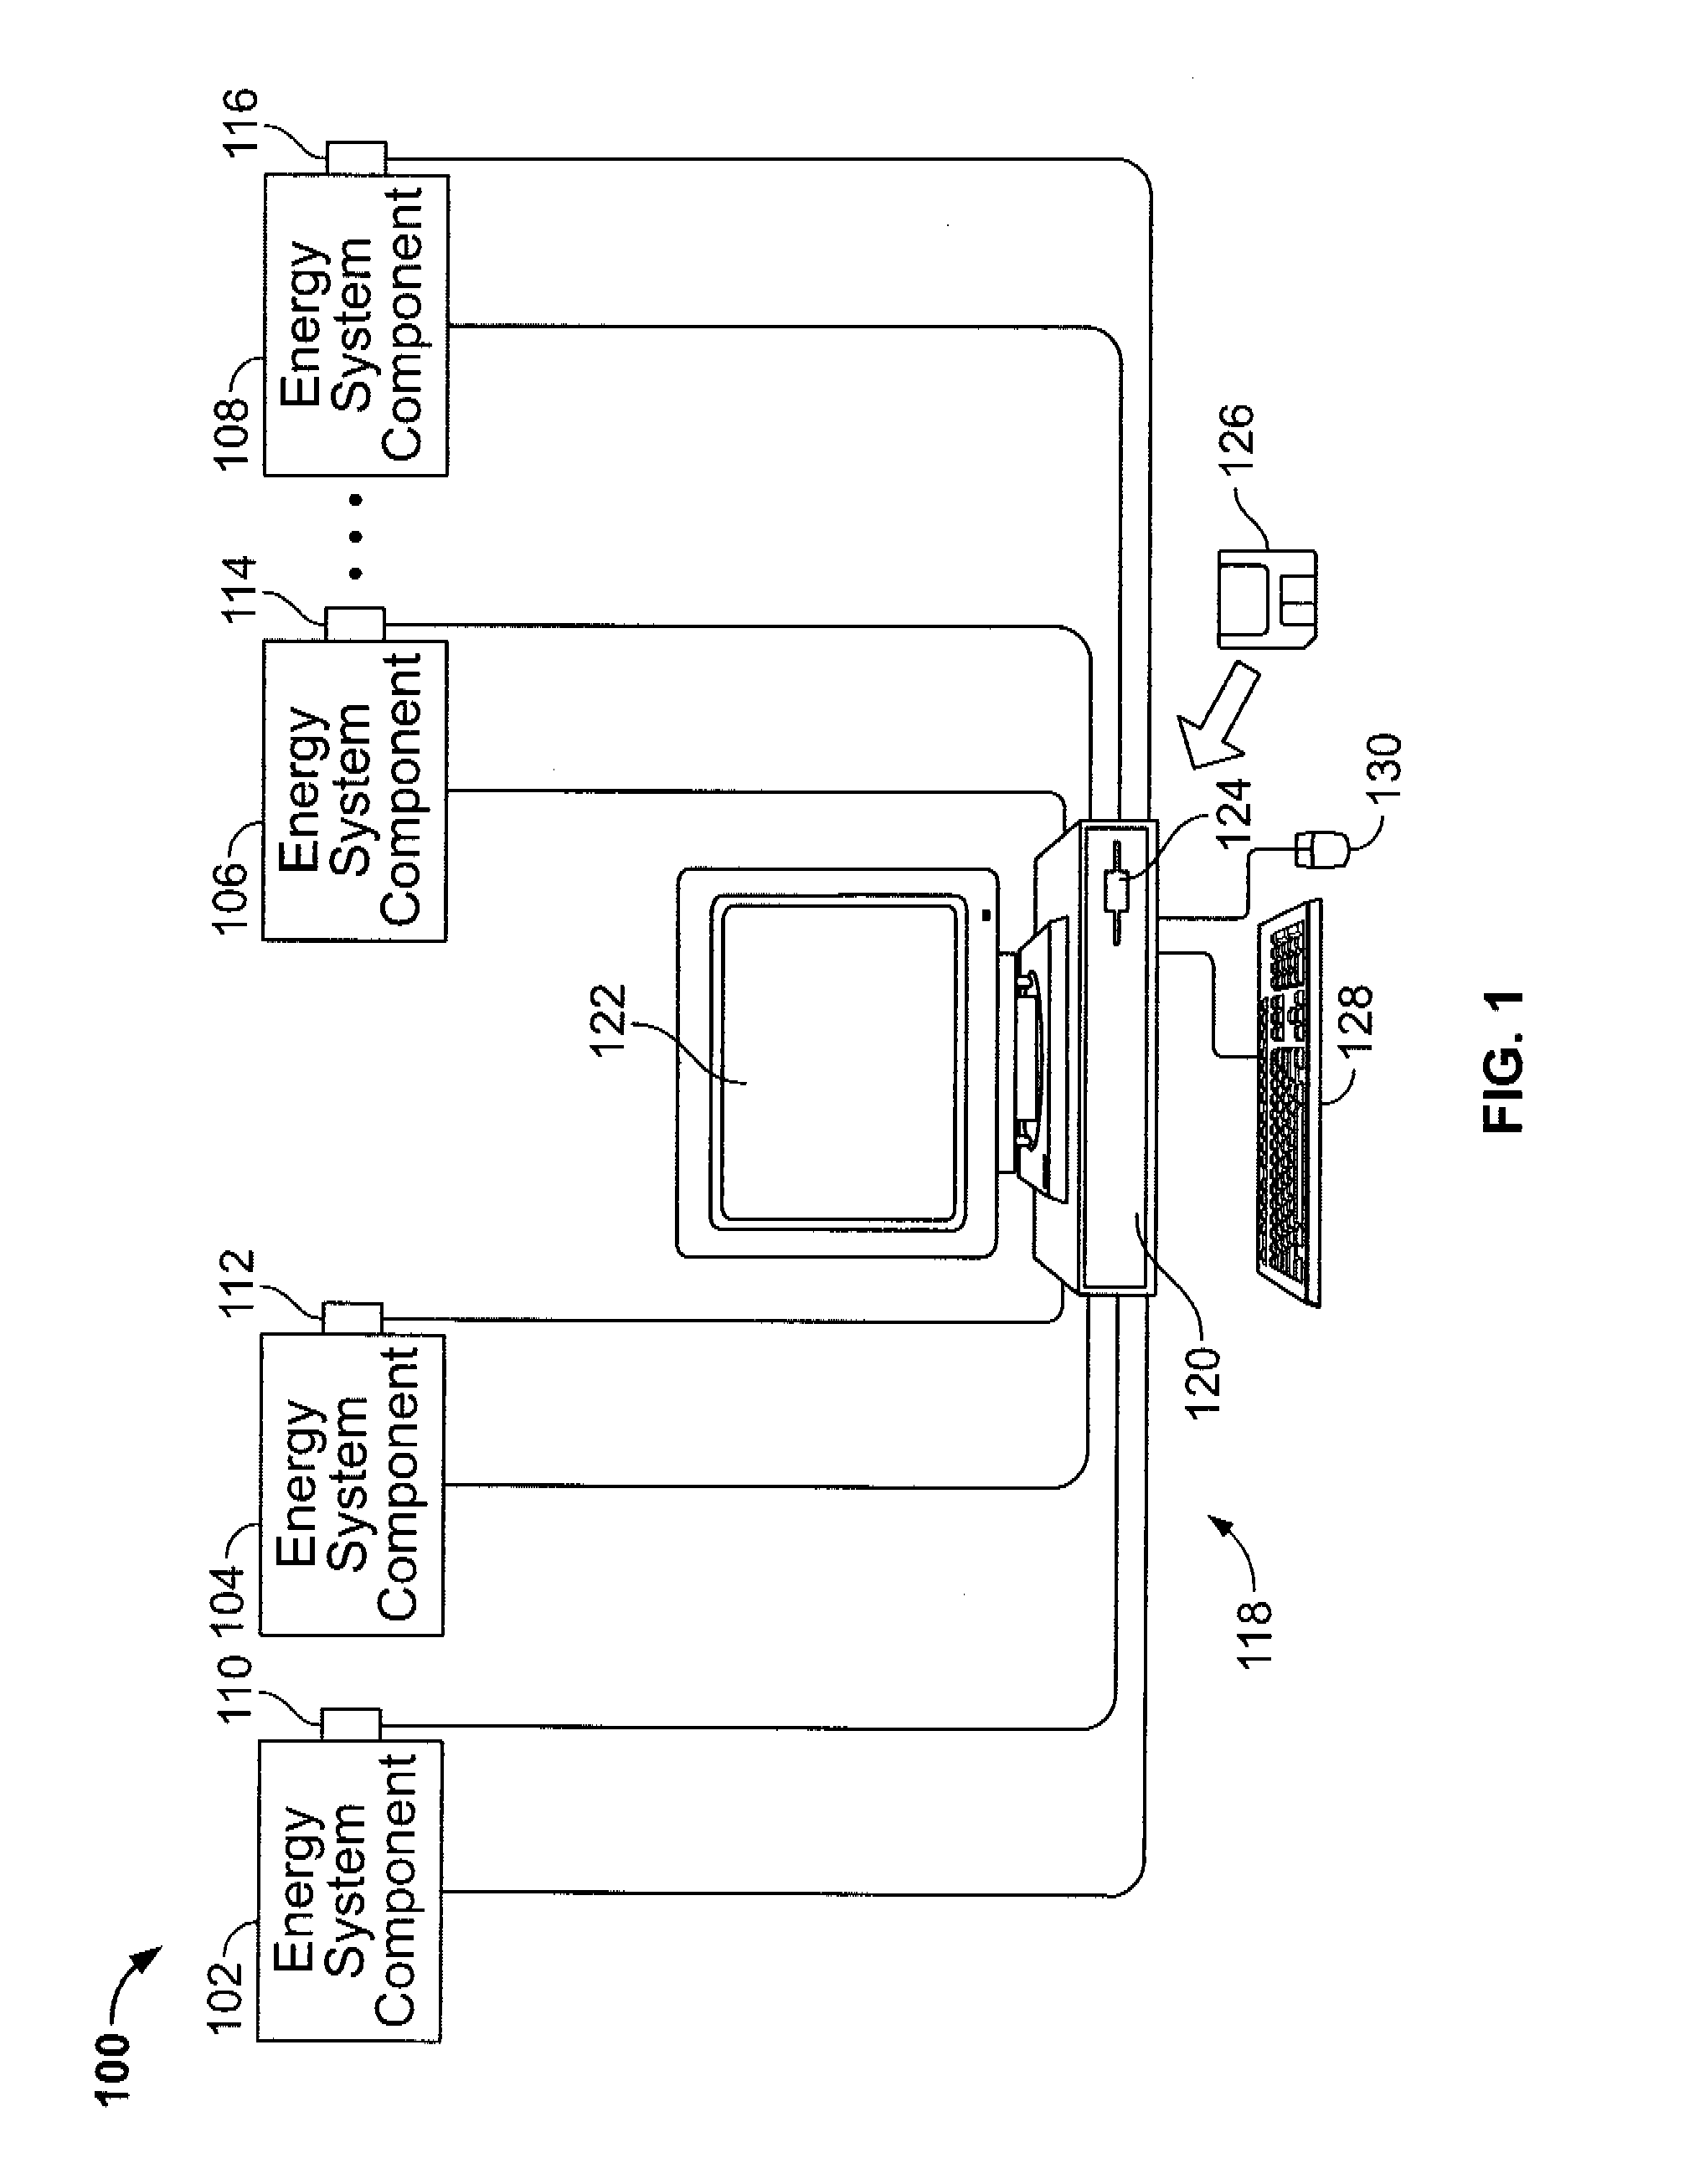 Energy system modeling apparatus and methods